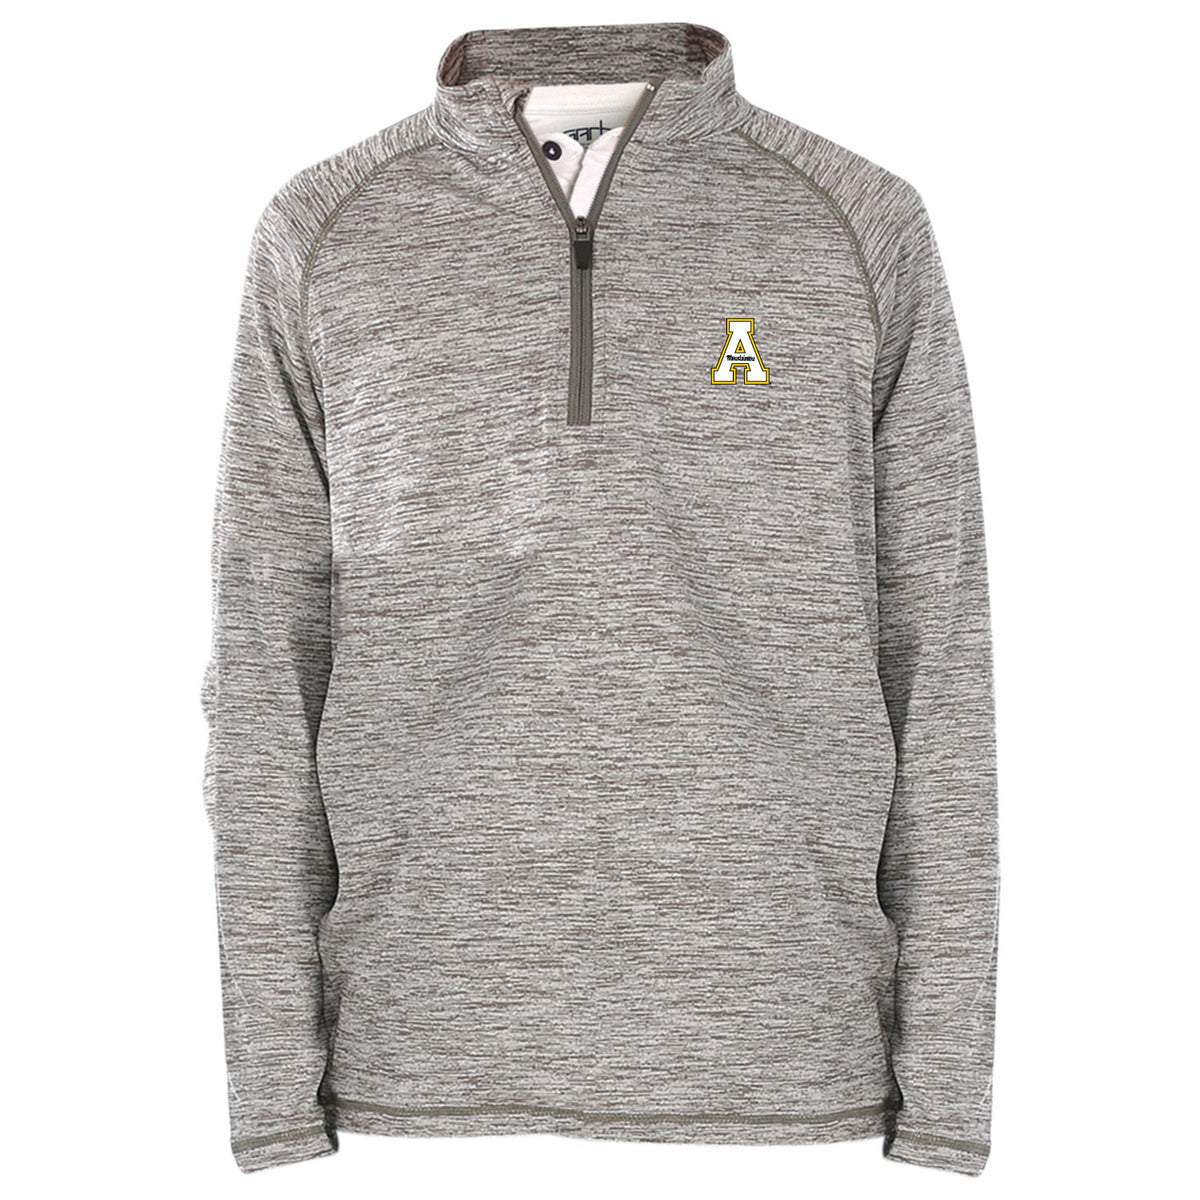 Appalachian State Mountaineers Youth Boys' 1/4-Zip Pullover